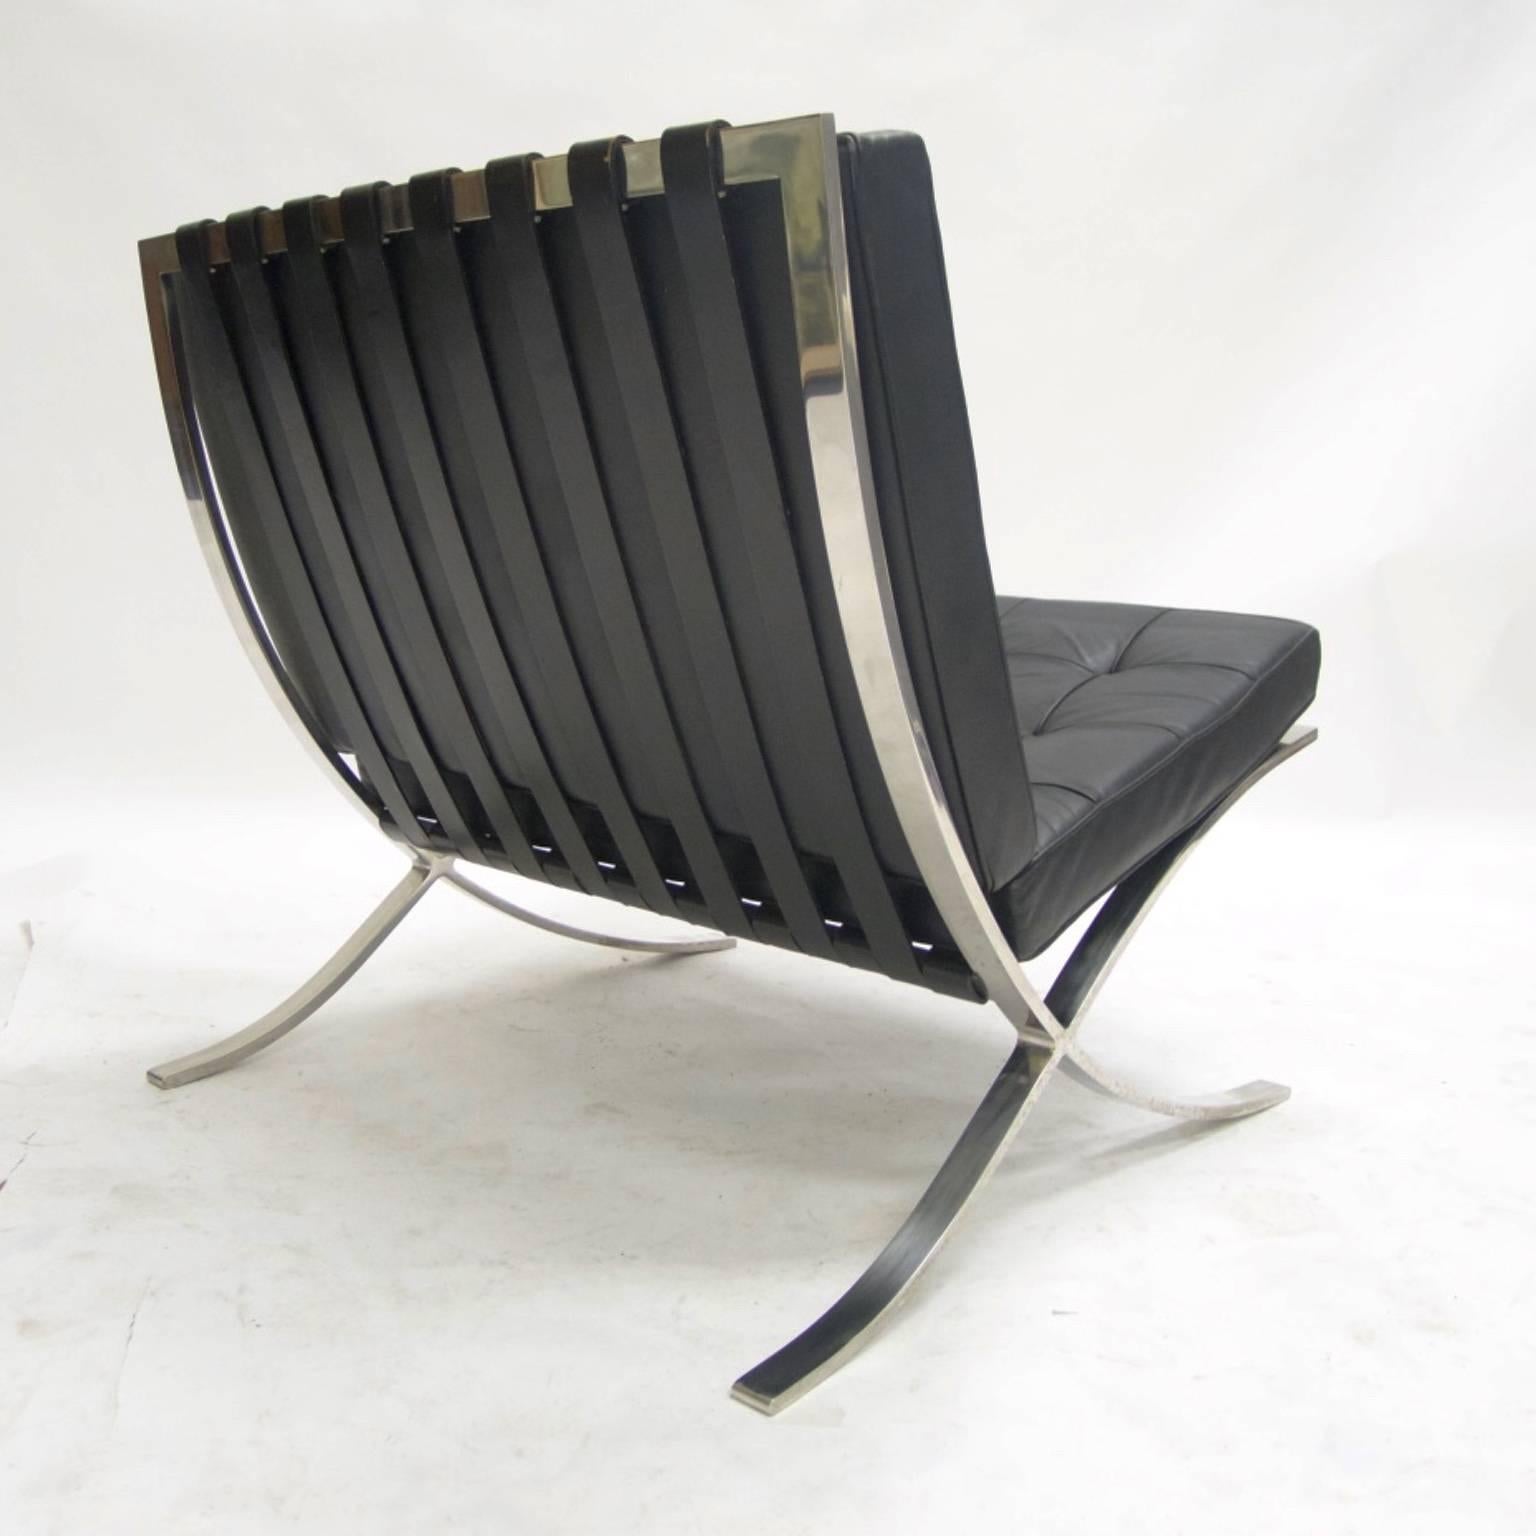 Stainless Steel  Early Black Leather Tufted Mies Van Der Rohe Barcelona Chair by Knoll